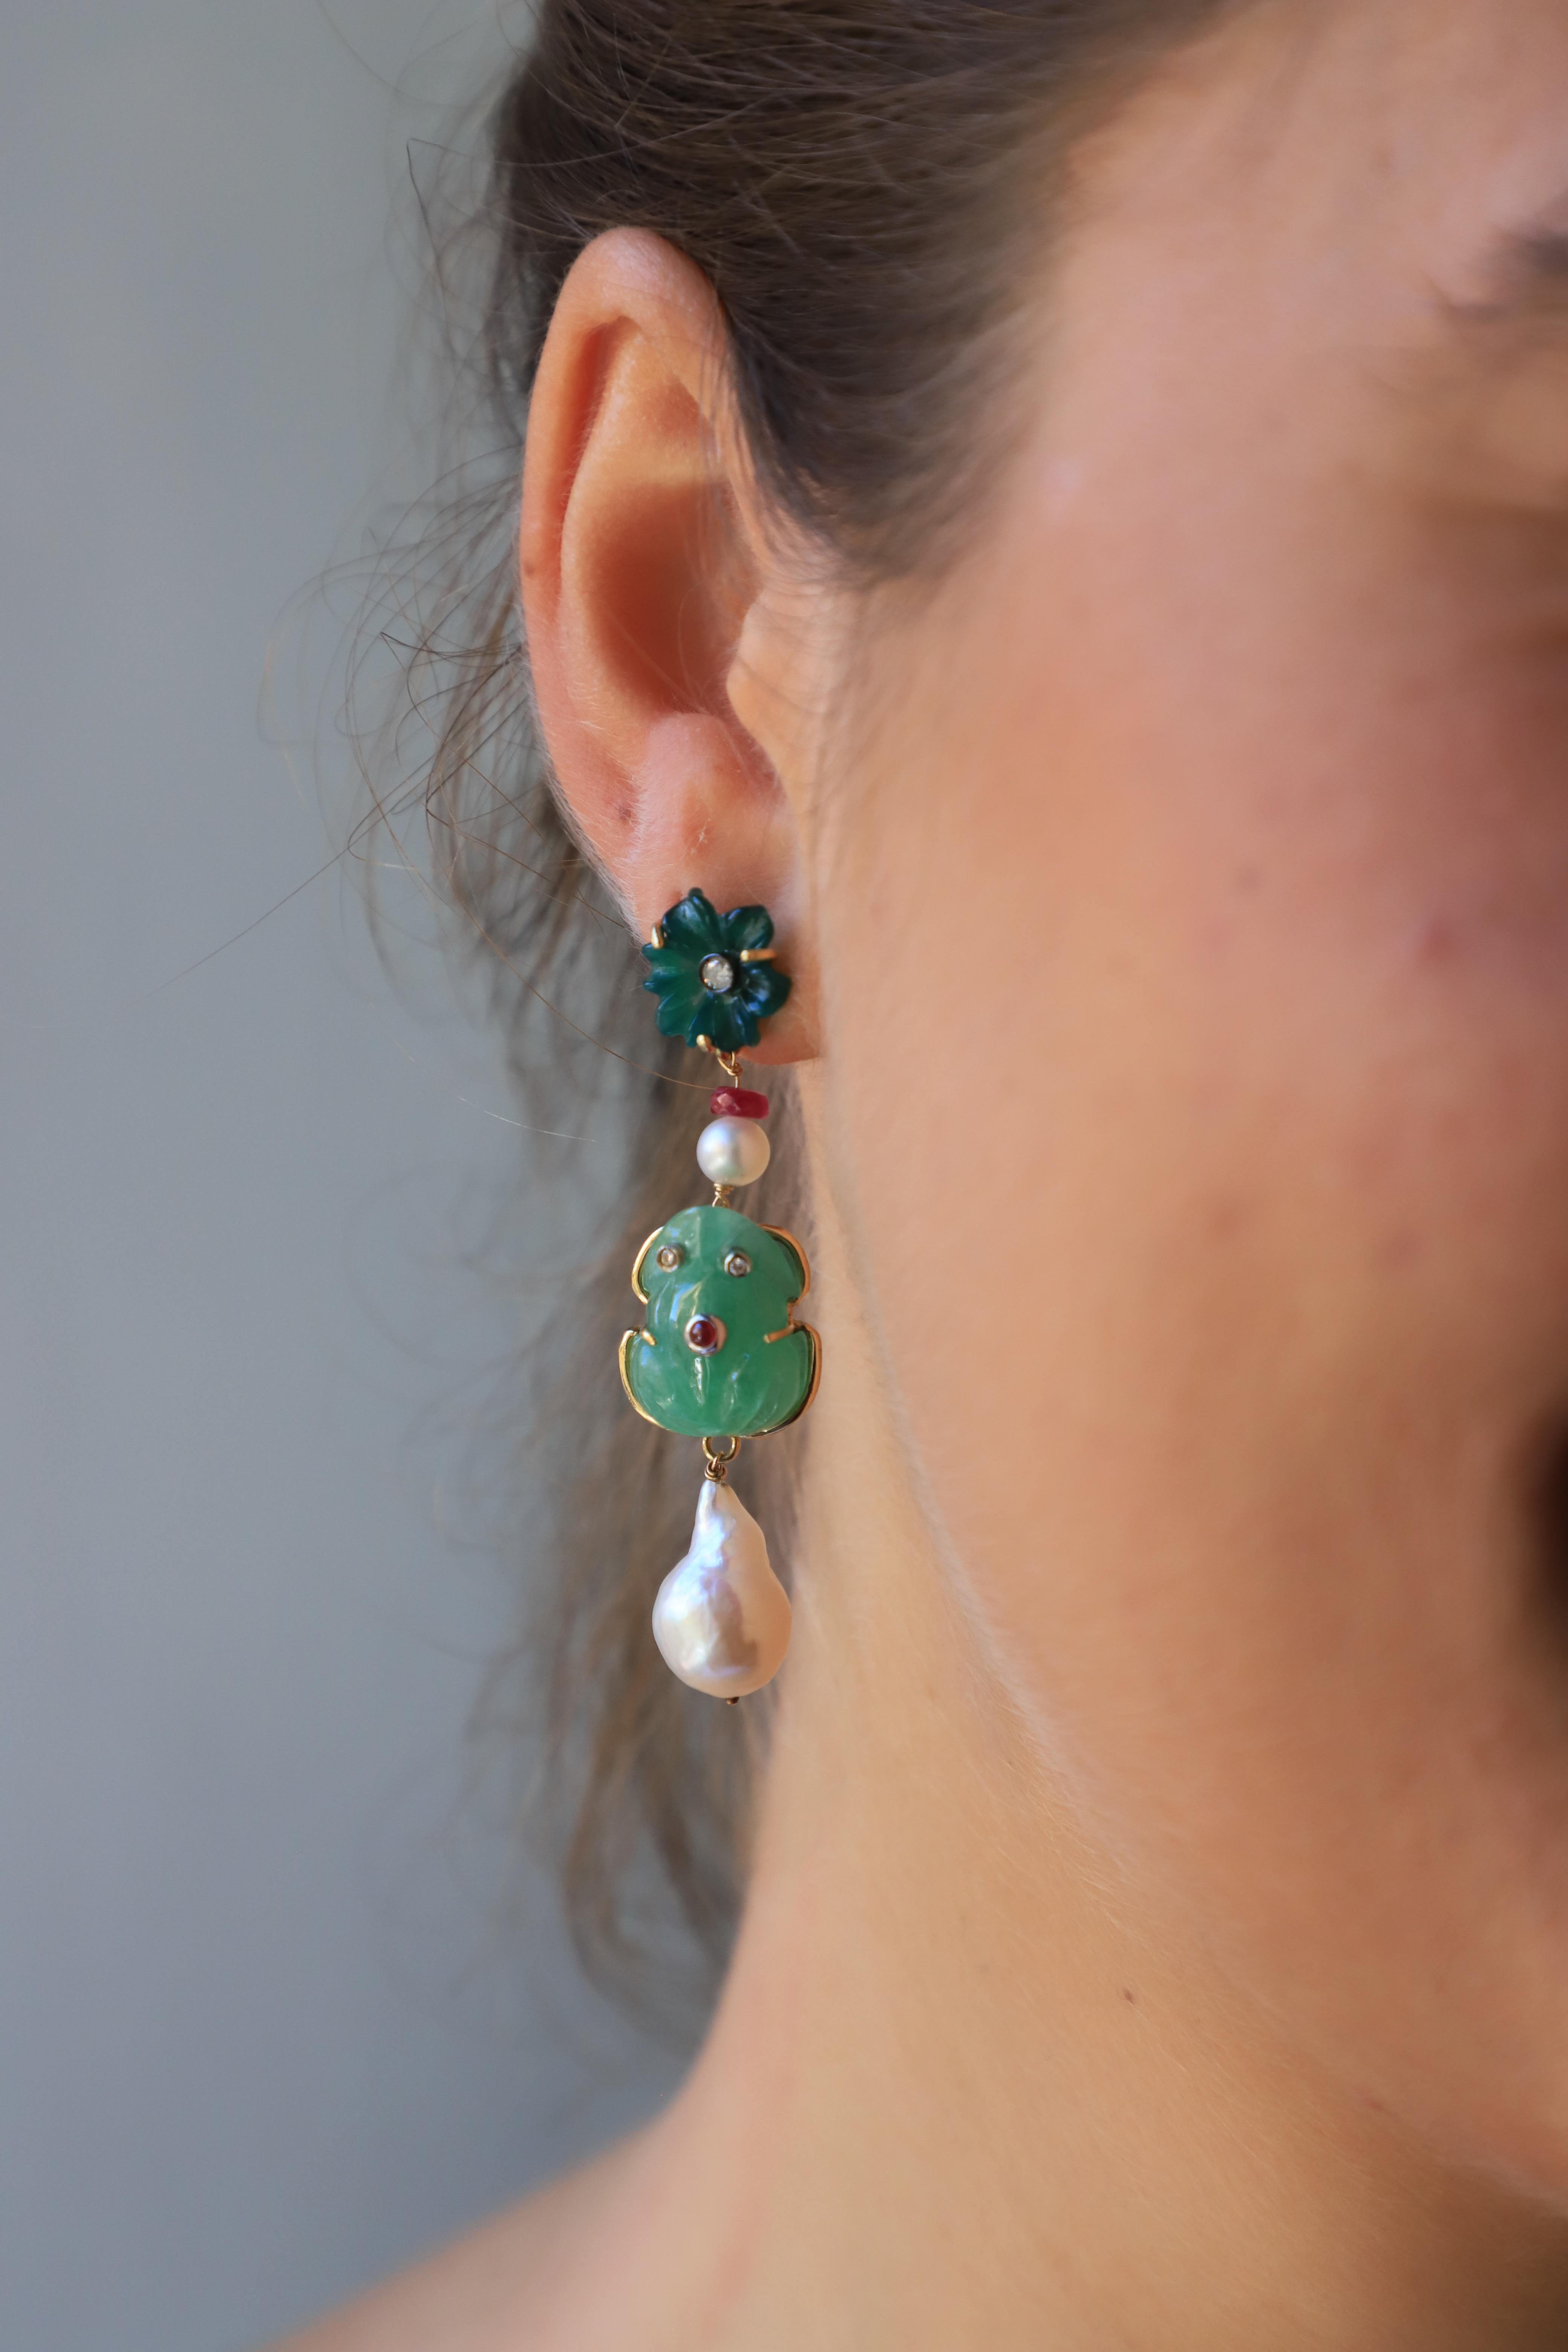 Rossella Ugolini Design Collection Handcrafted 18 Karat Gold Green Jade Frog shaped 0.08 Carat White Diamonds Ruby and green Agate flower Dangle Earrings
Item in stock, handling time: 1 business day
Dimensions: 0.32 in. (8 mm) x 0.79 in. (20 mm) x